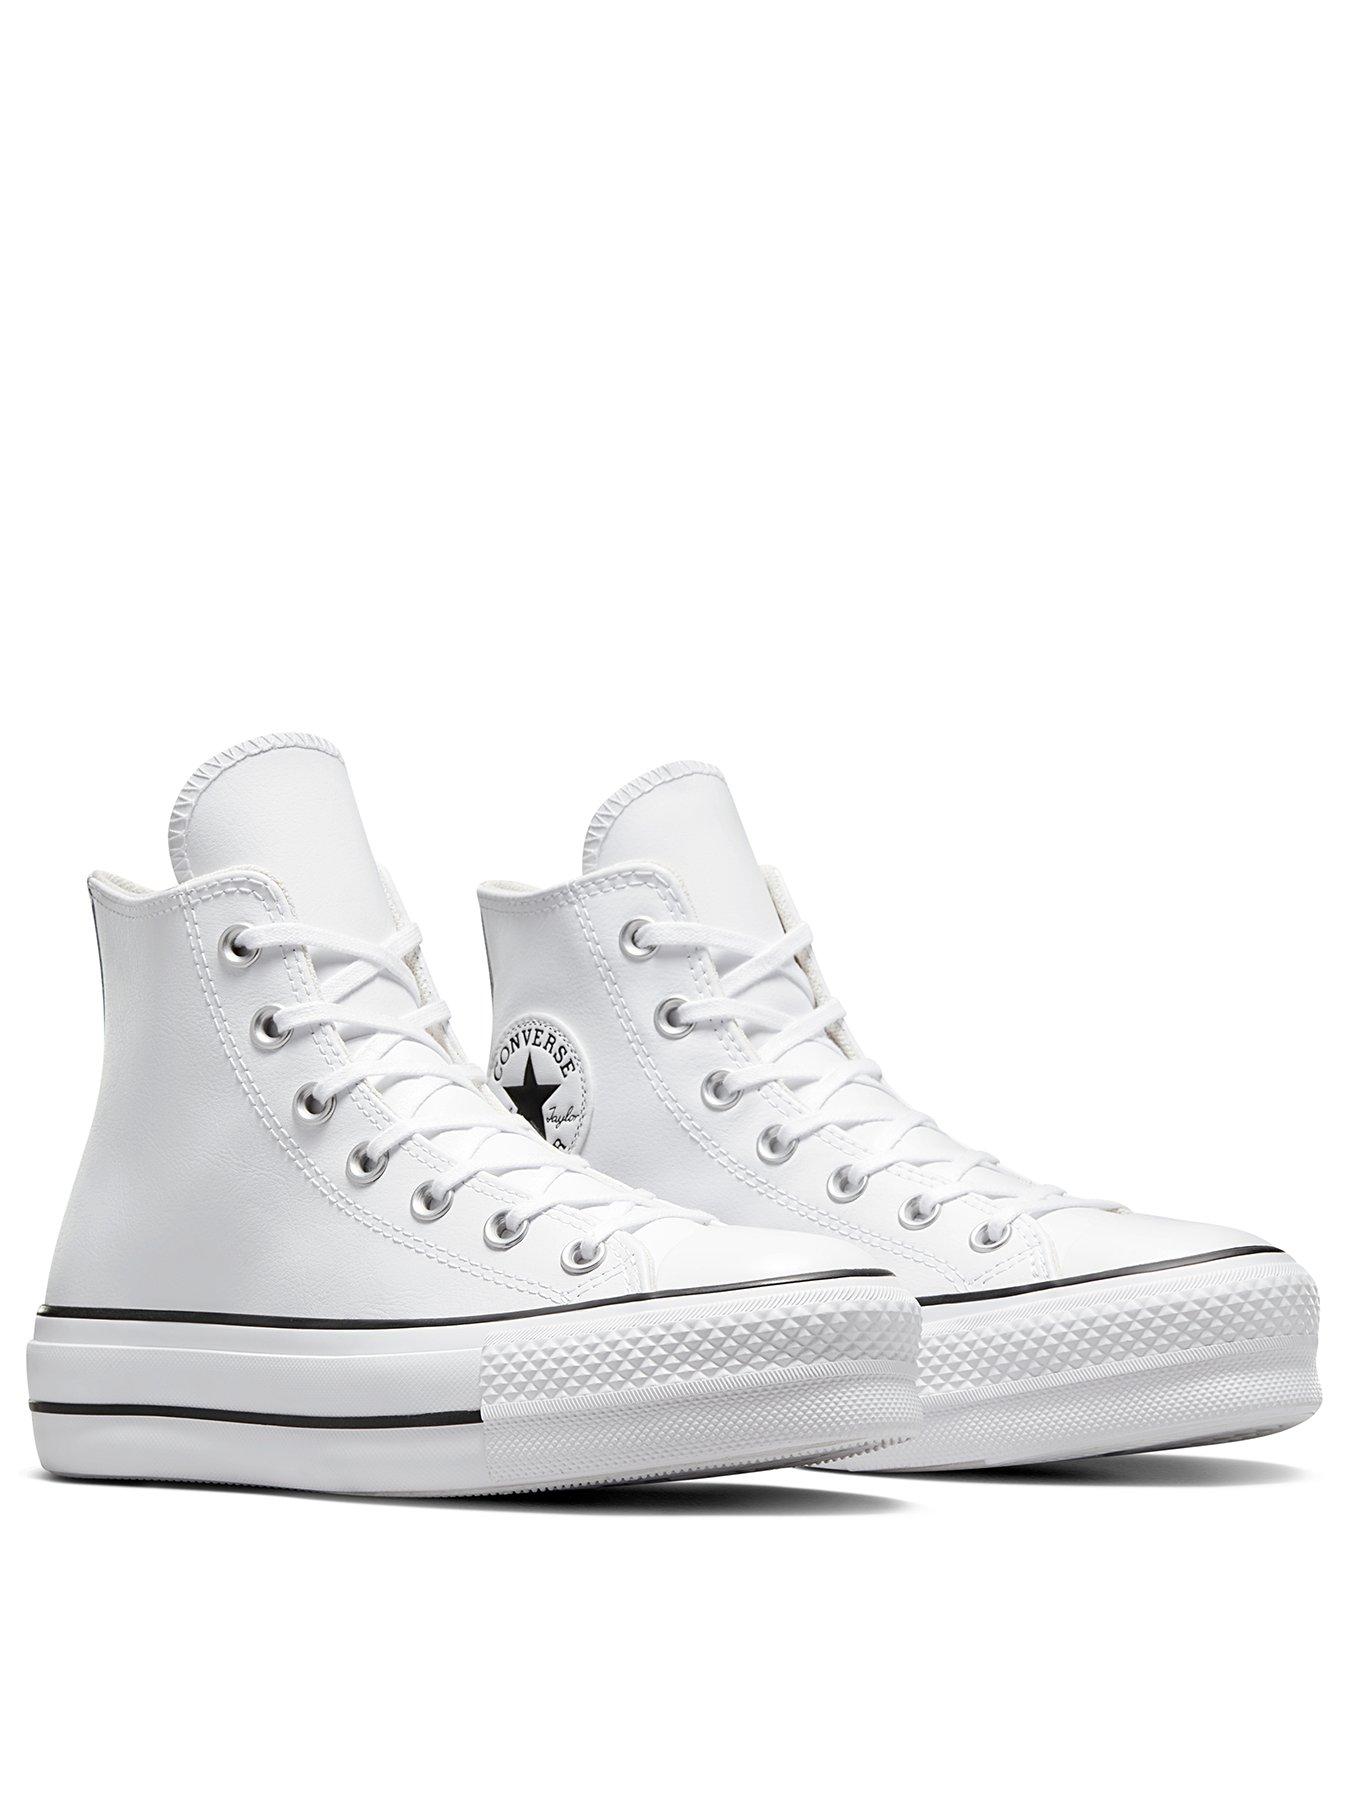 Converse Chuck Taylor All Star Leather Platform Hi-Tops - White